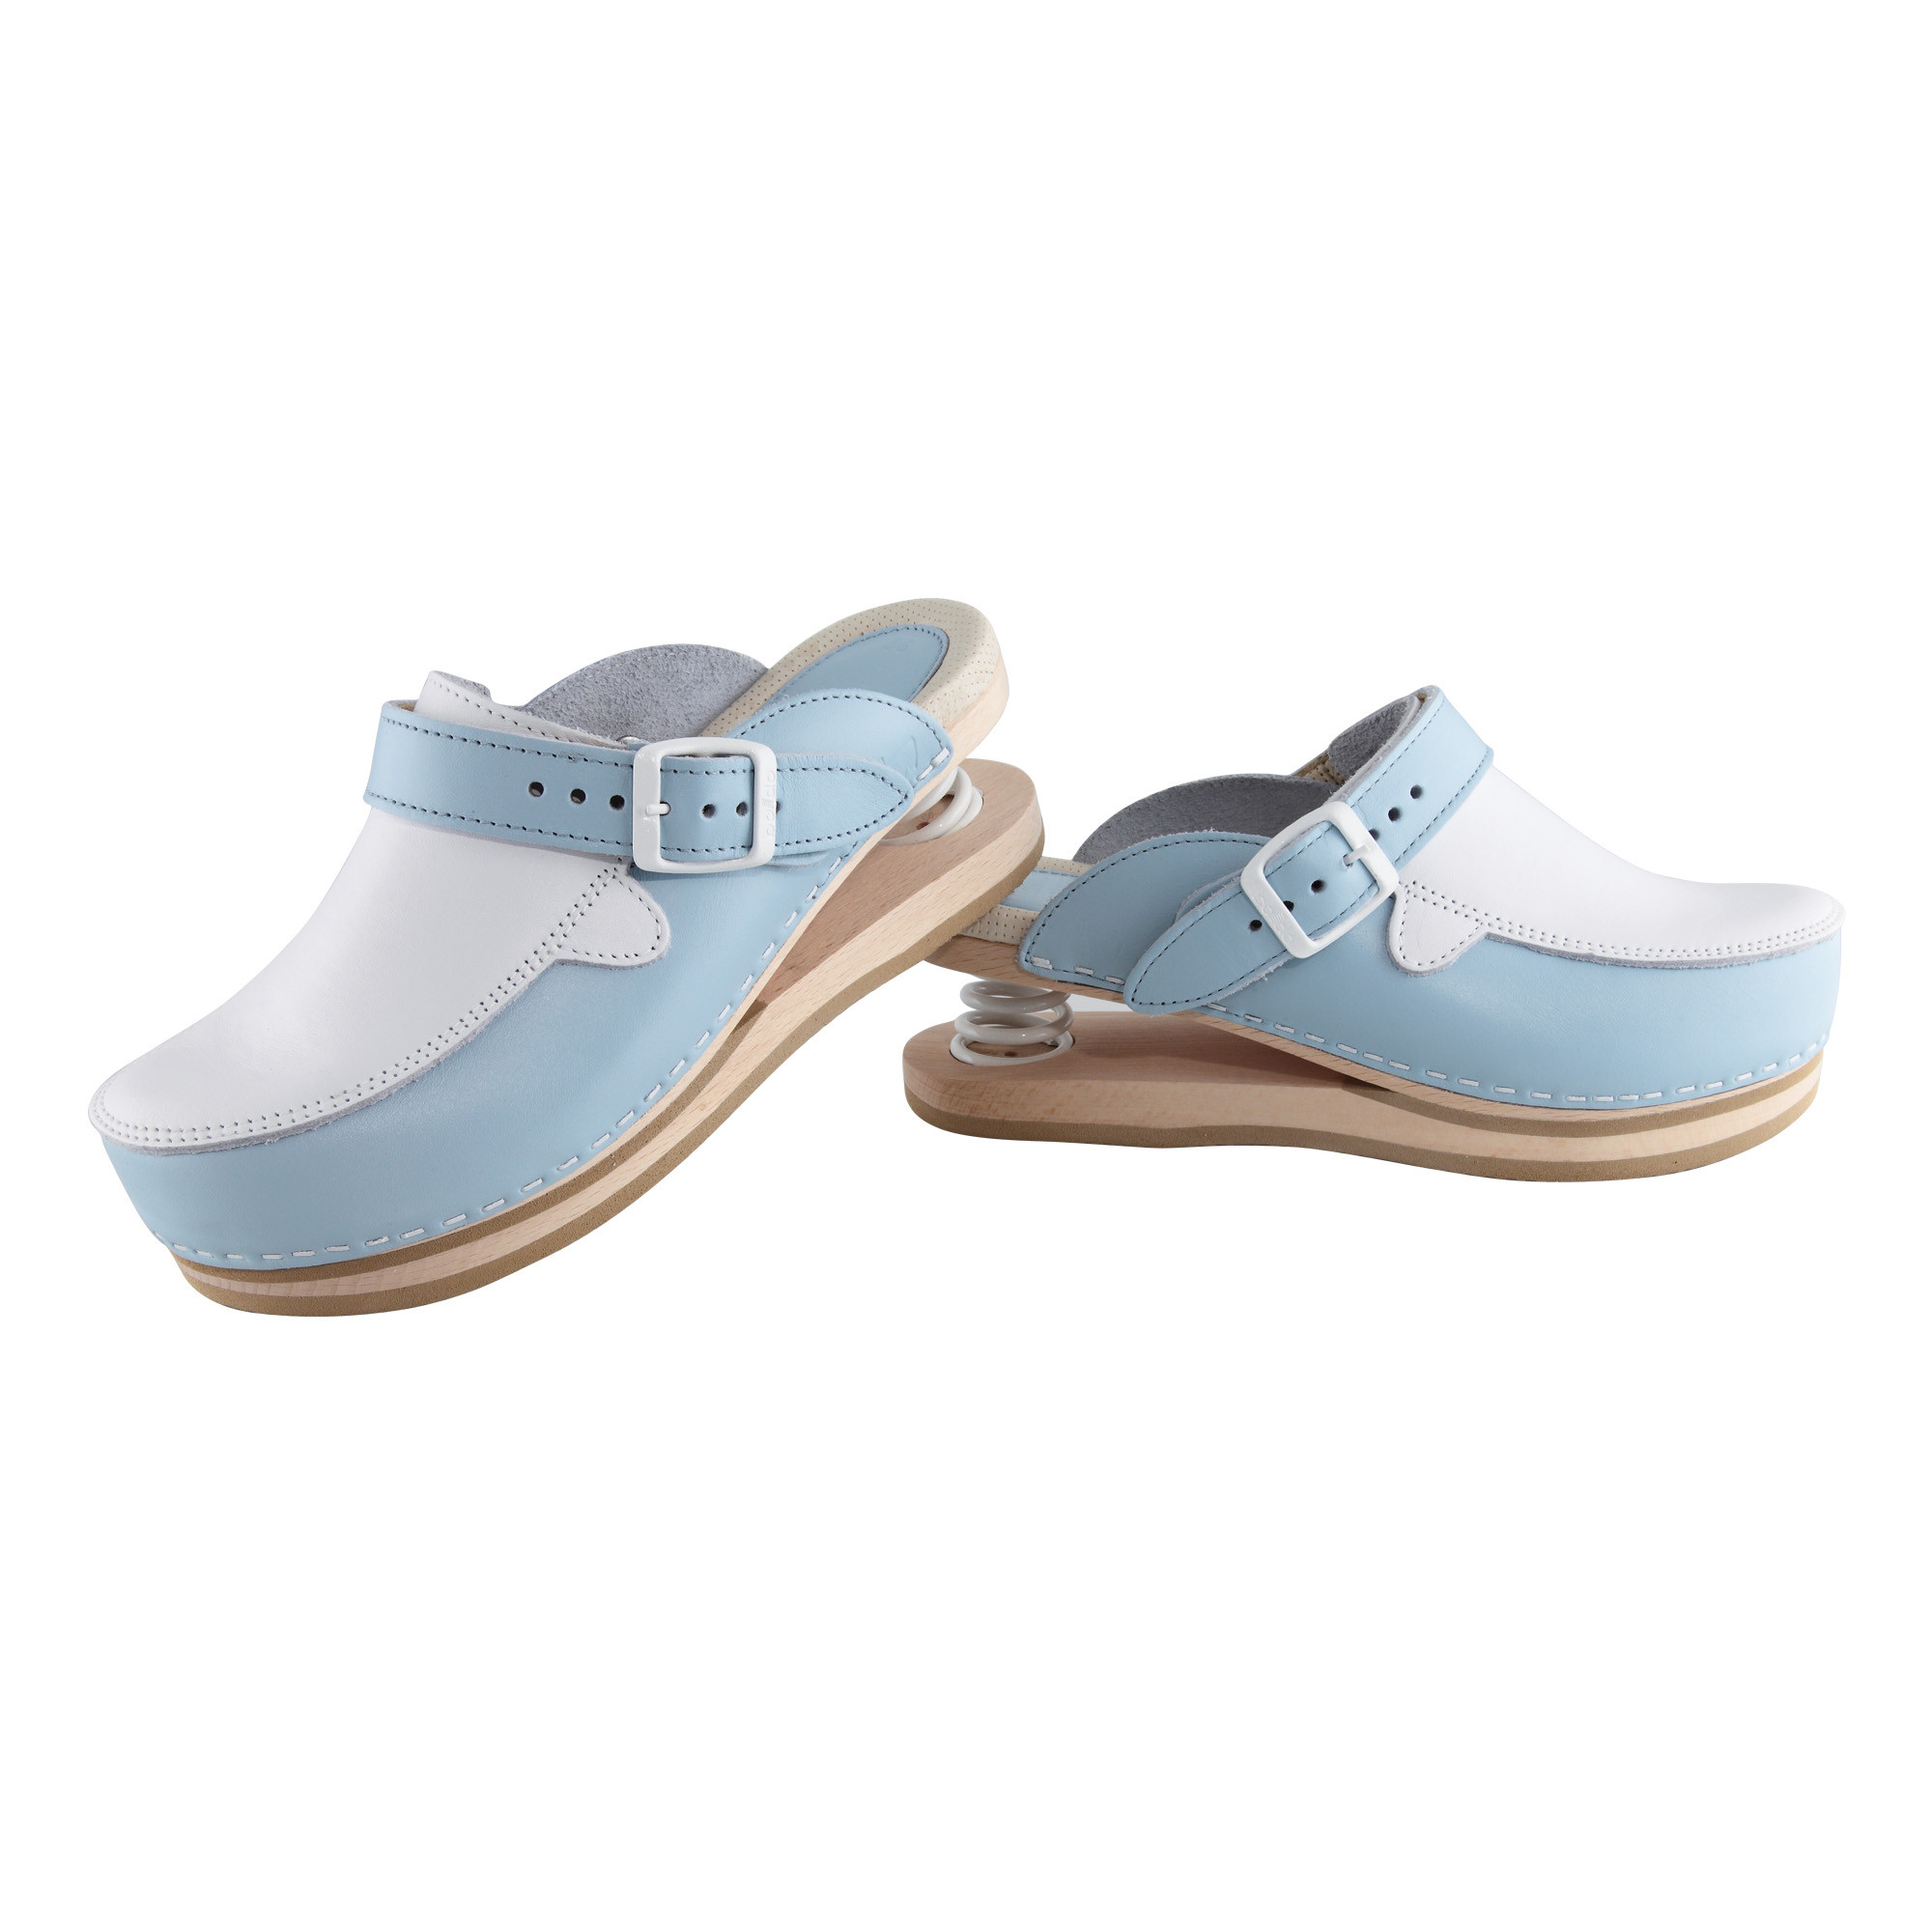 Relax clogs closed with blue spring Size 36